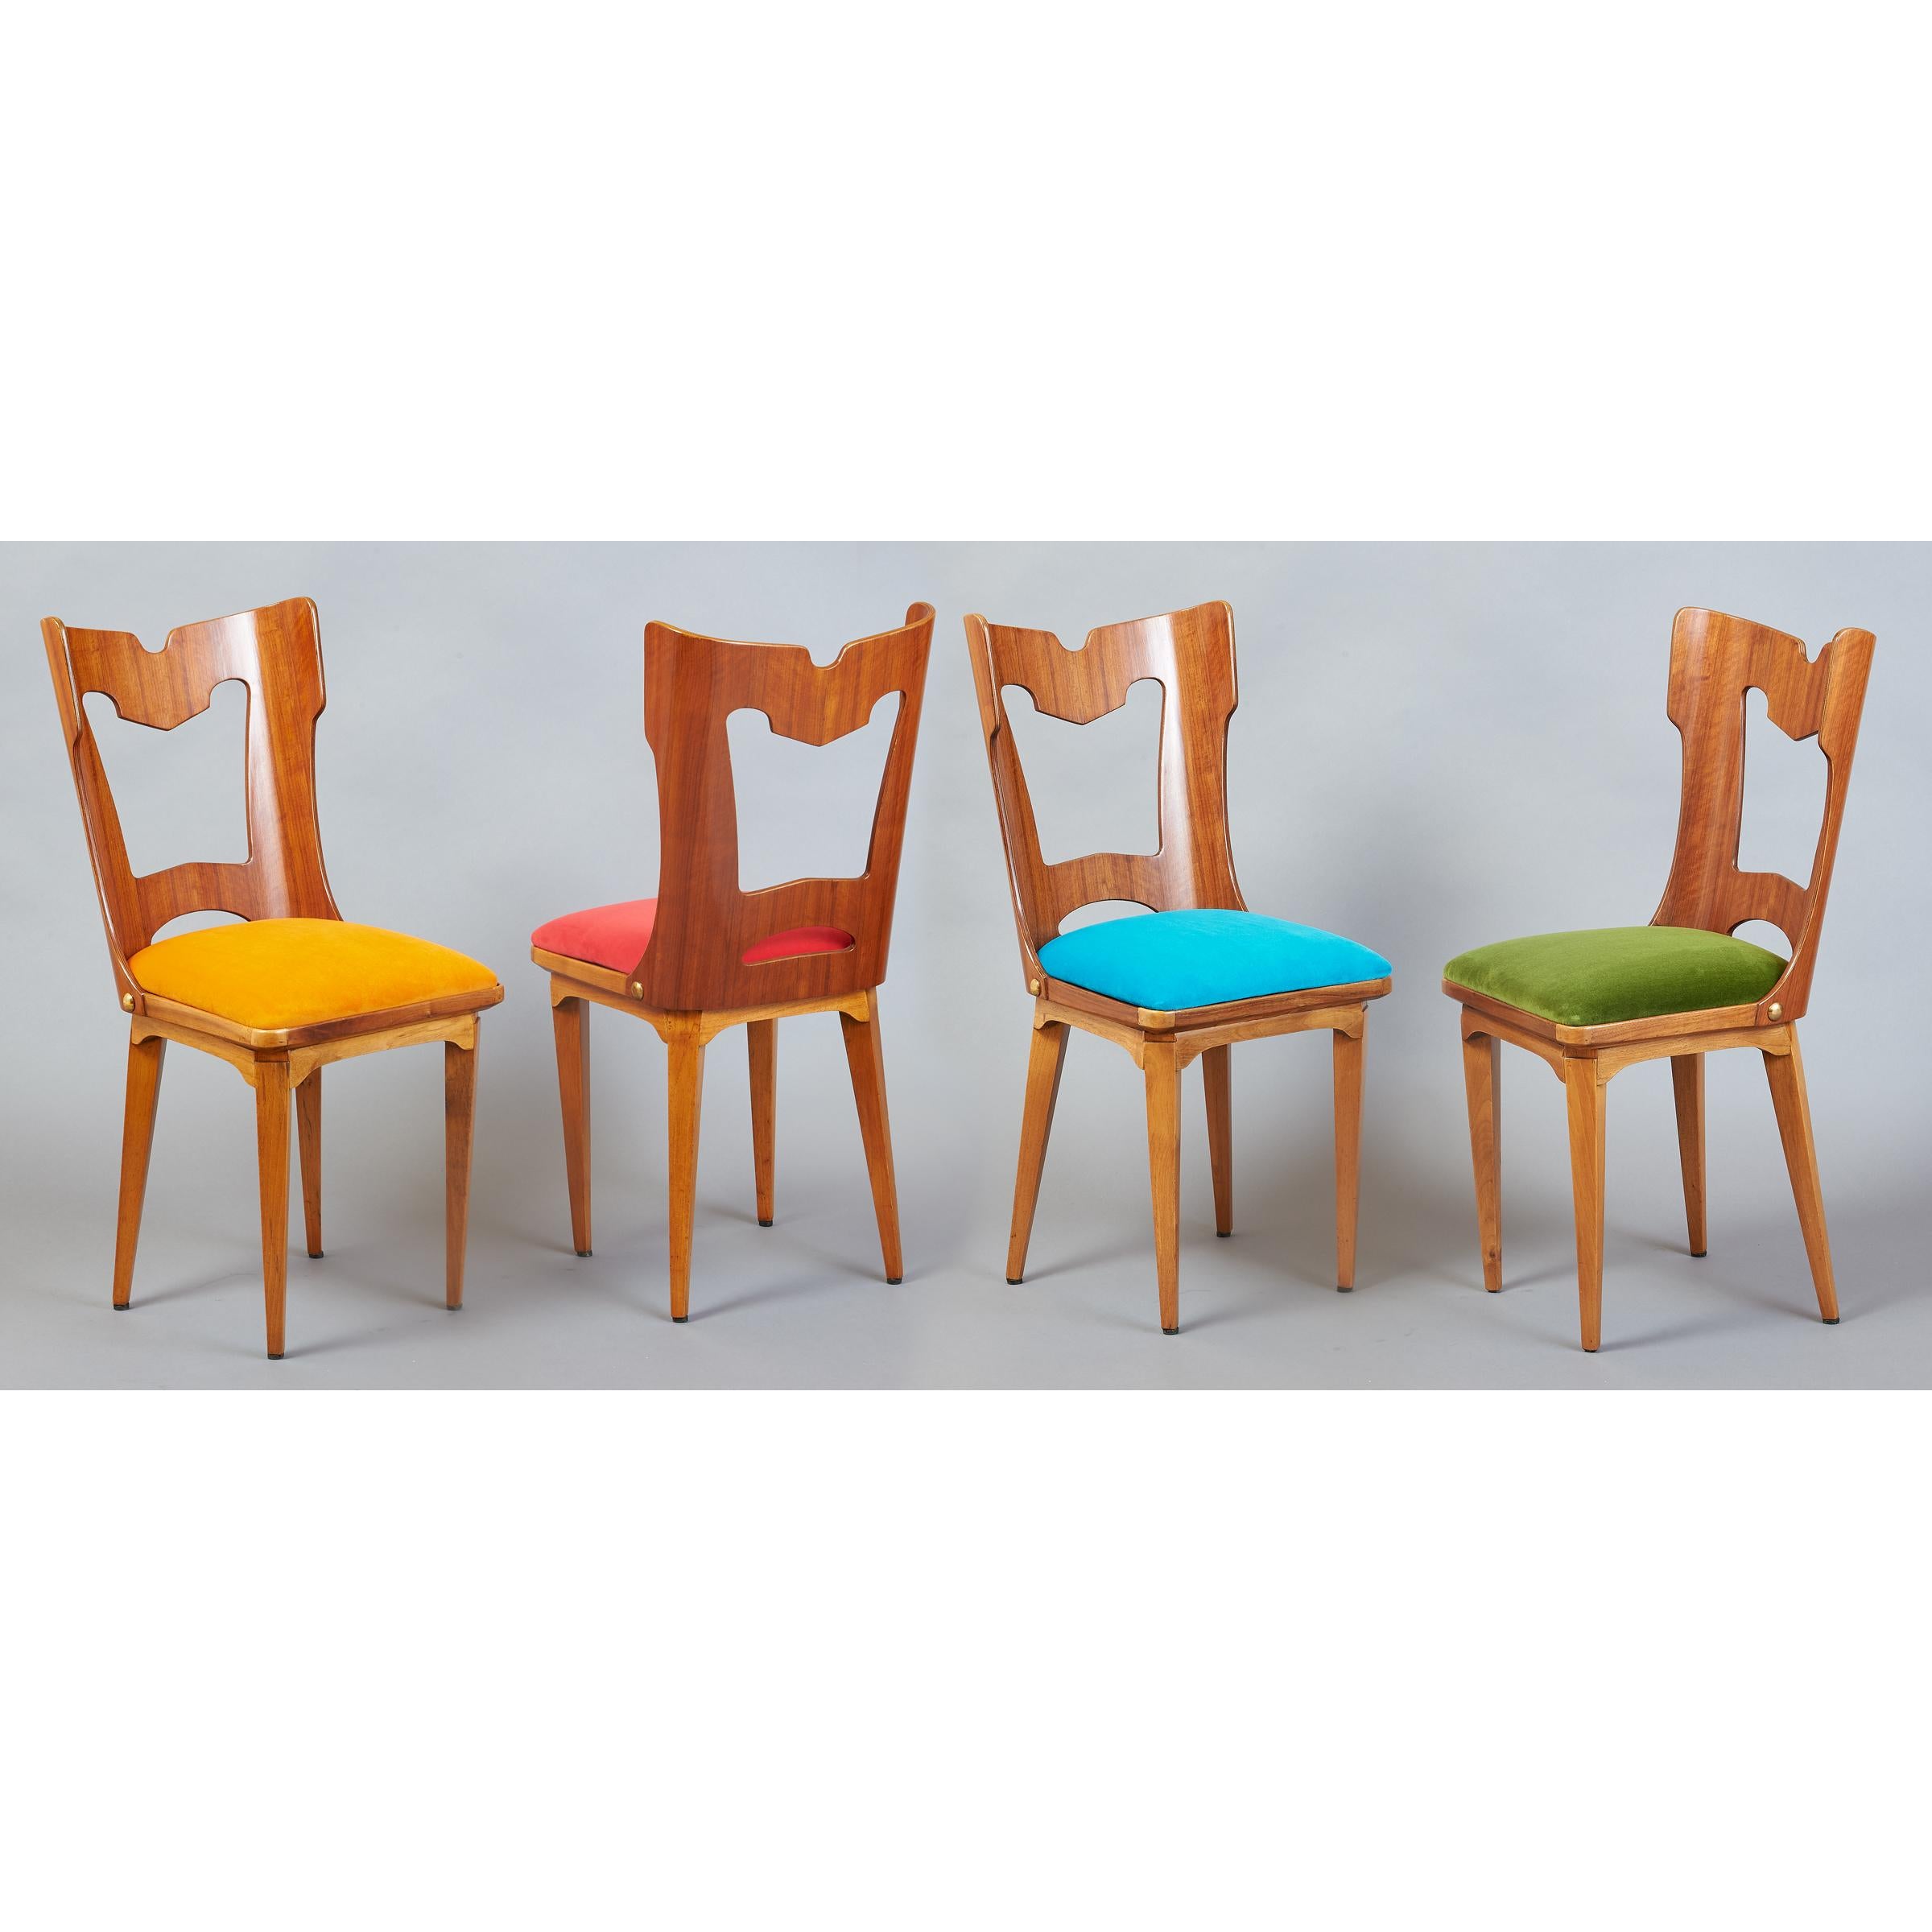 Mid-Century Modern Set of Four Sculptural Chairs, Italy, 1950s